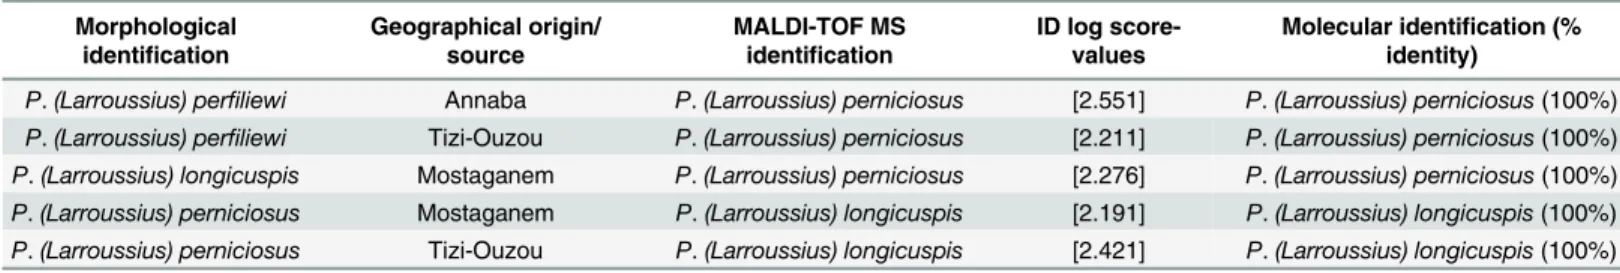 Table 3. Molecular determination from discordant results between morphological and mass spectrometry sand fly species identification.